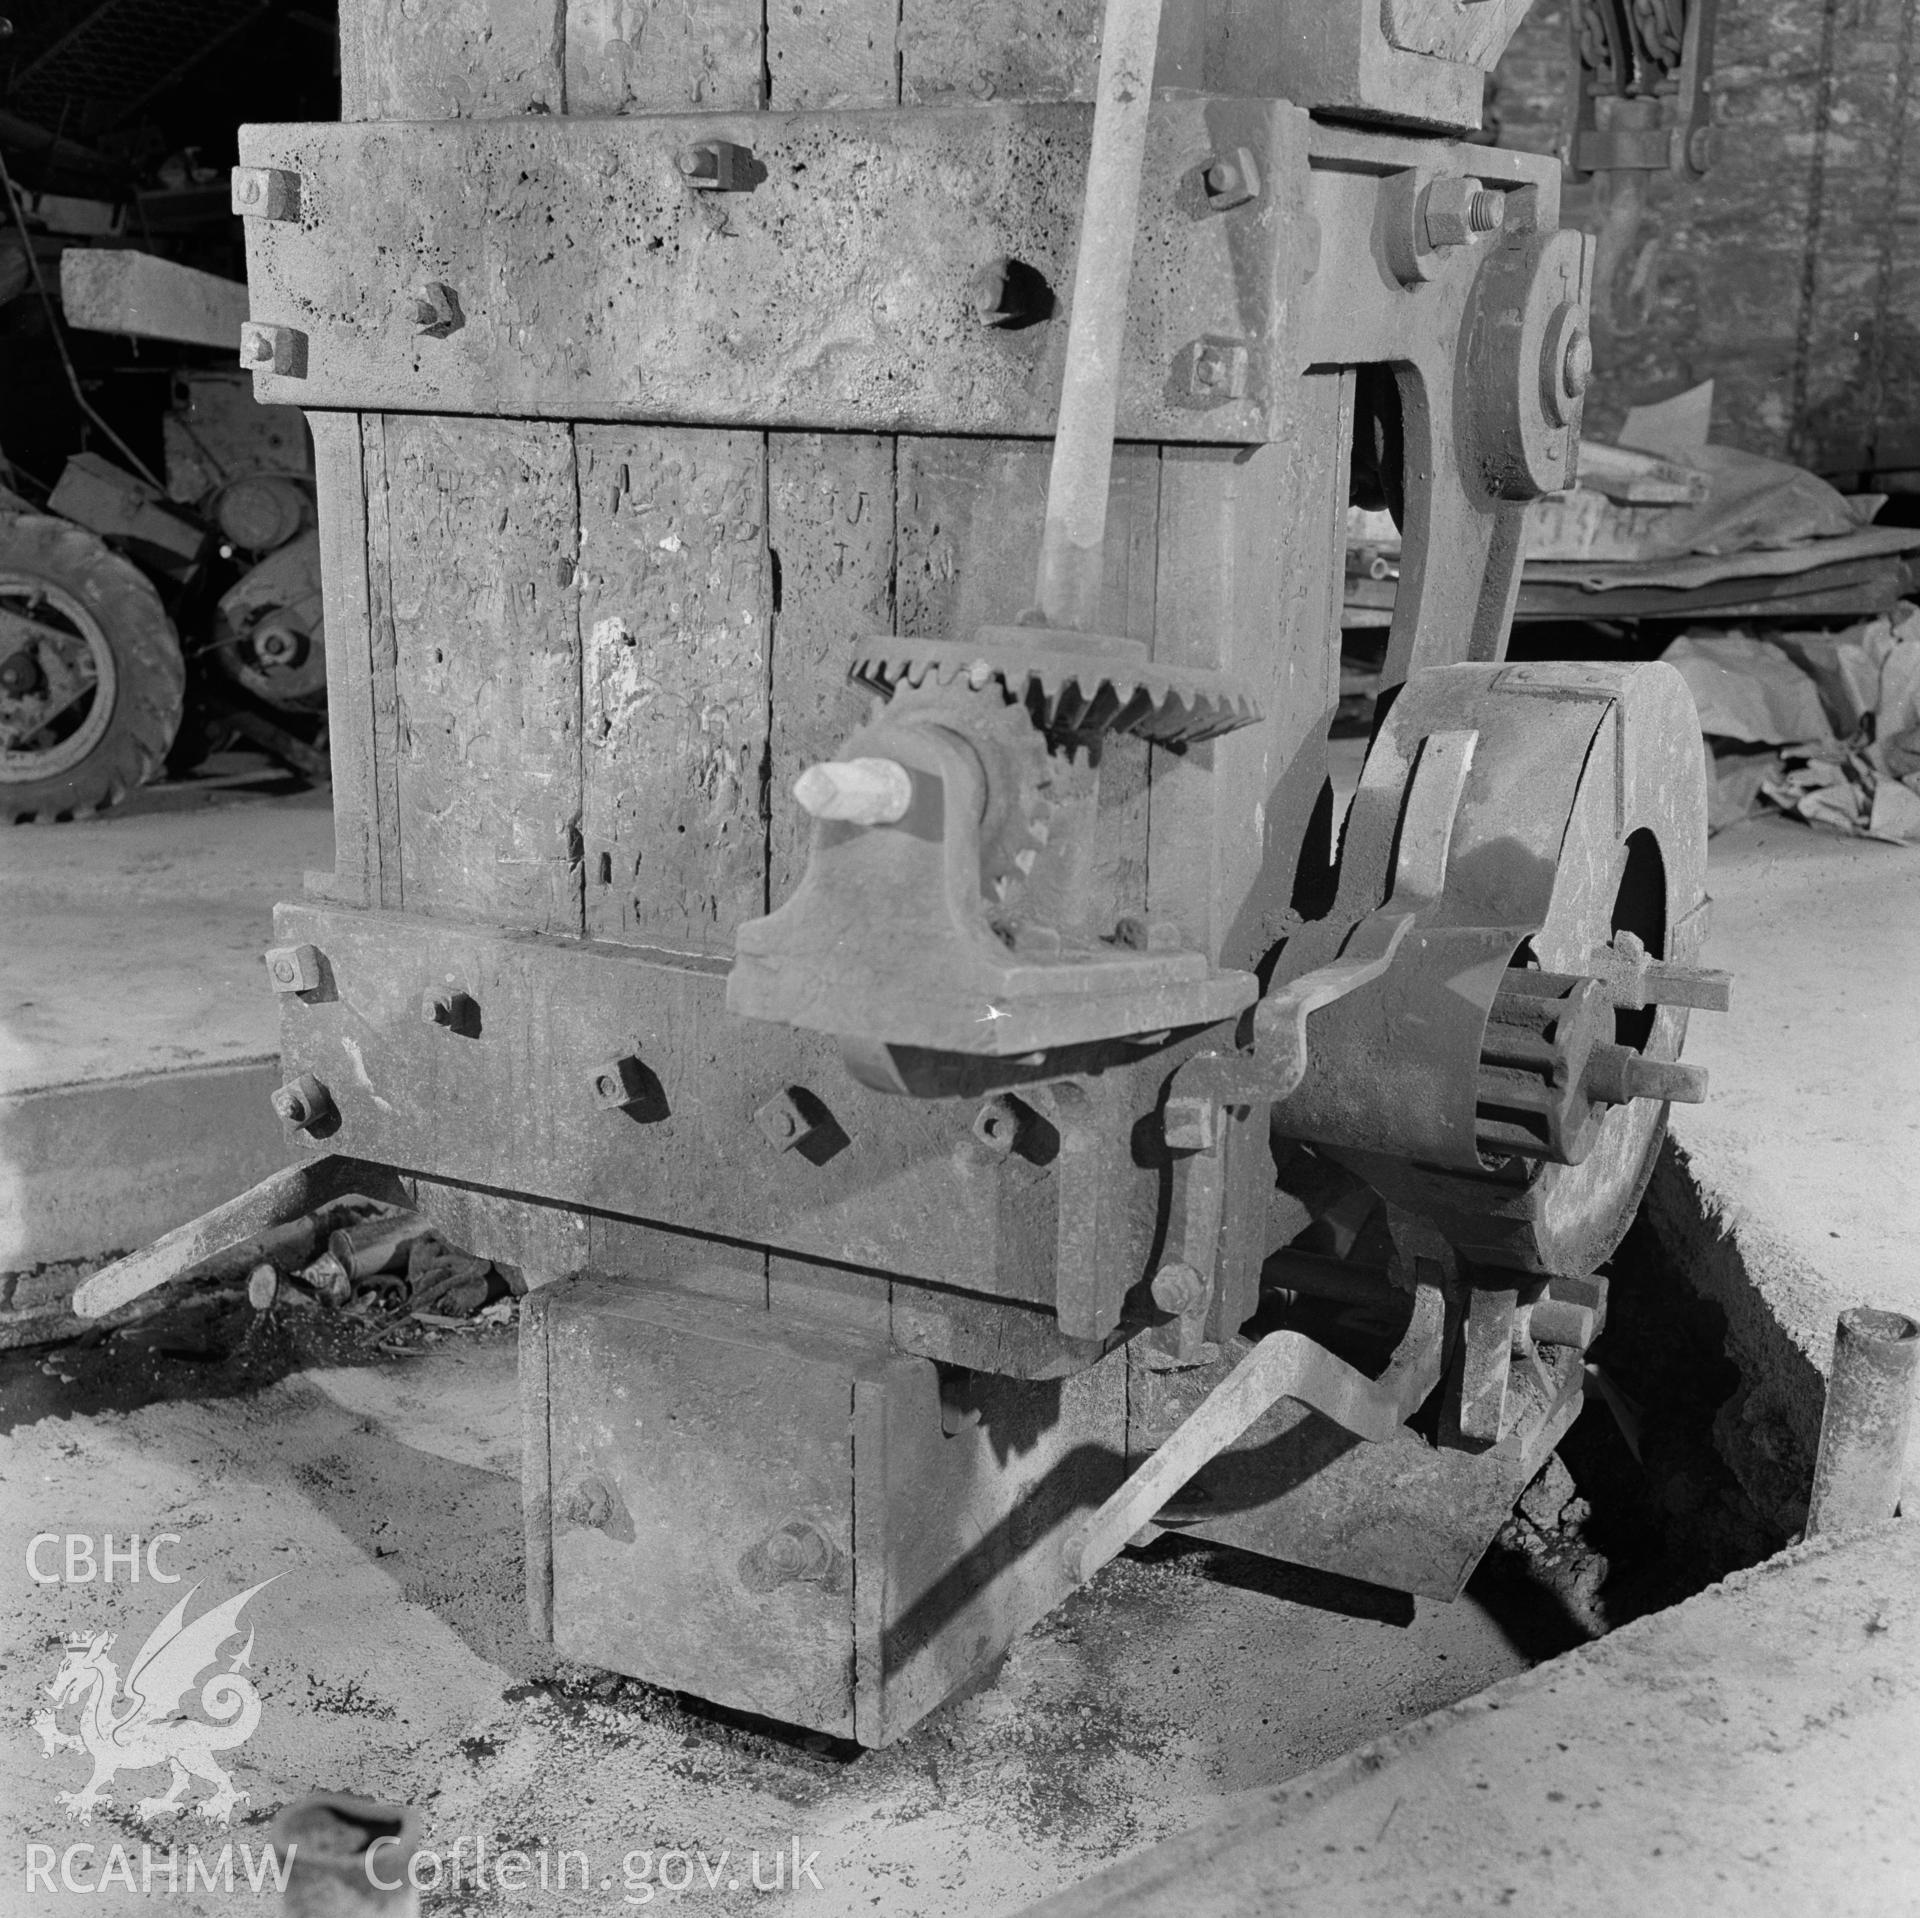 Digital copy of a black and white negative showing detail of the crane at Player's Works Foundry, Clydach, taken by RCAHMW, undated